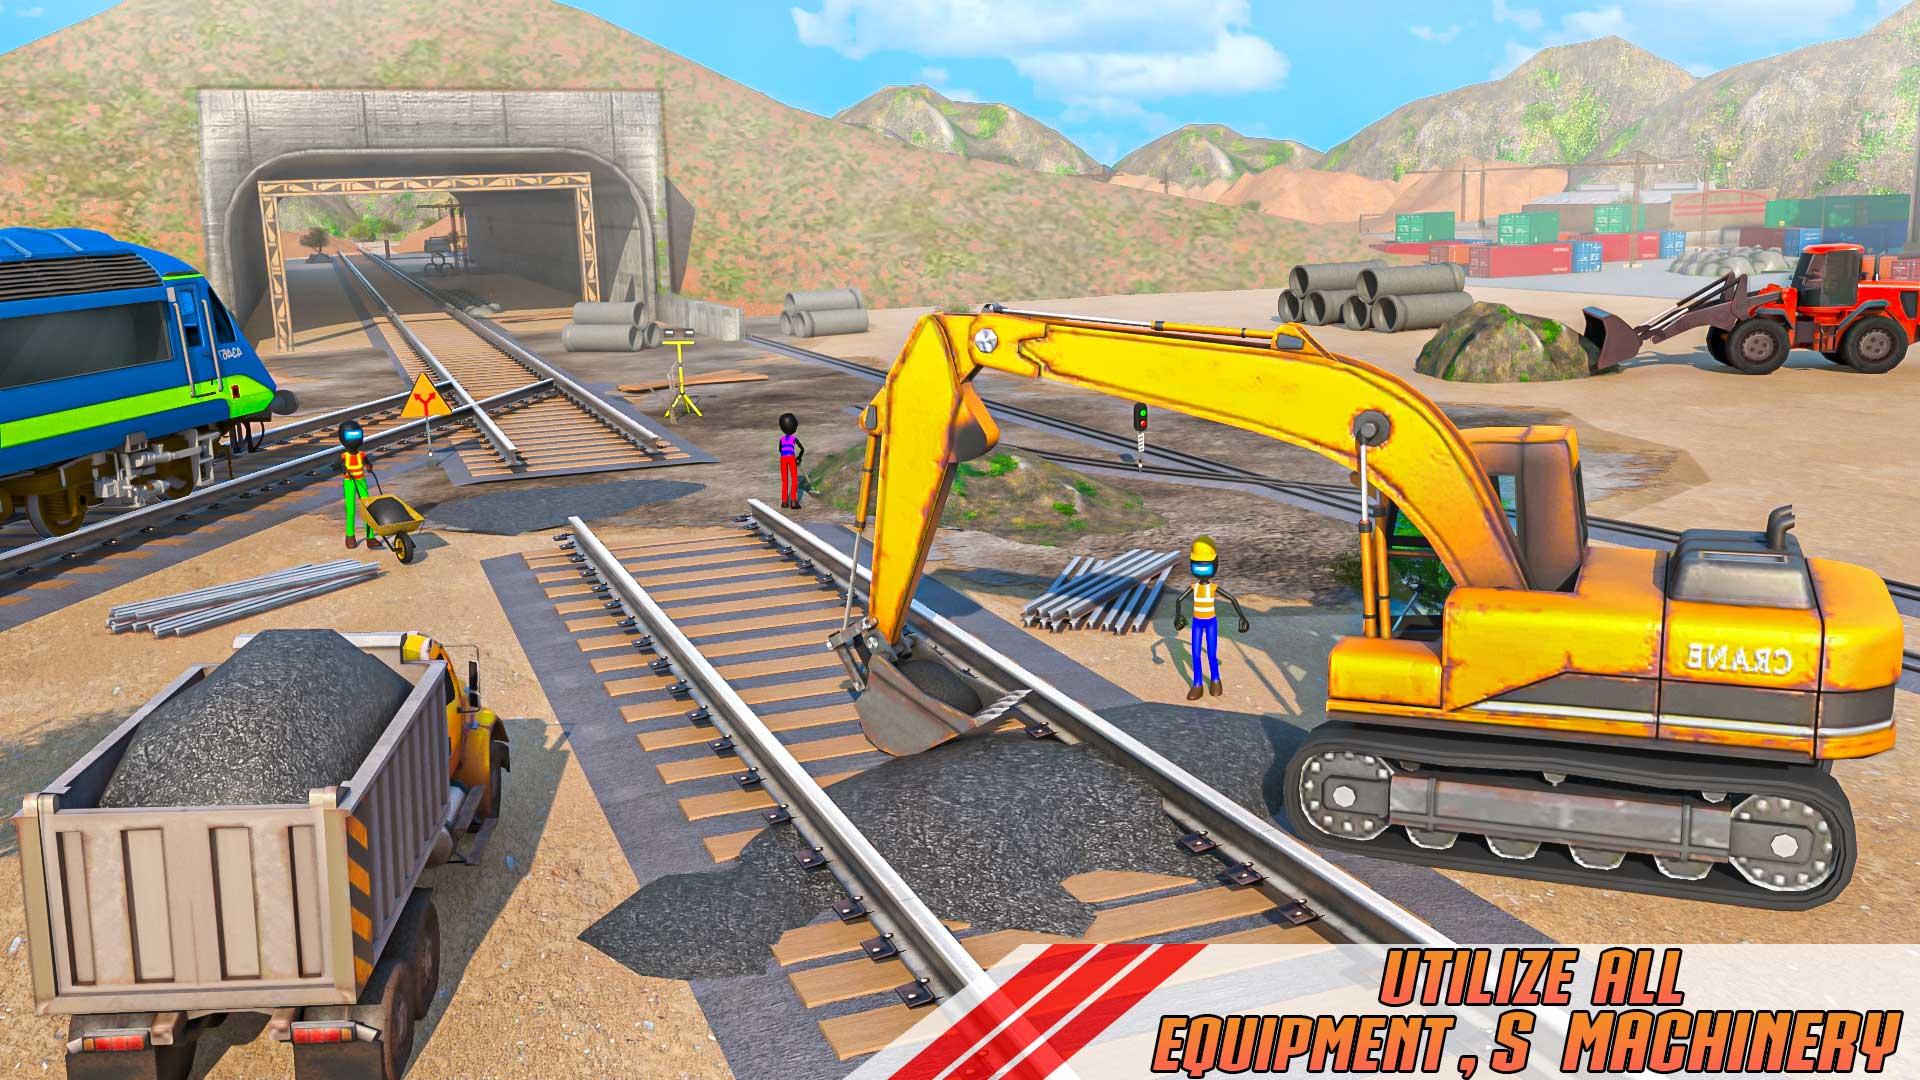 Grand Construction Excavator: Red Imposter Game 1.0 Screenshot 8